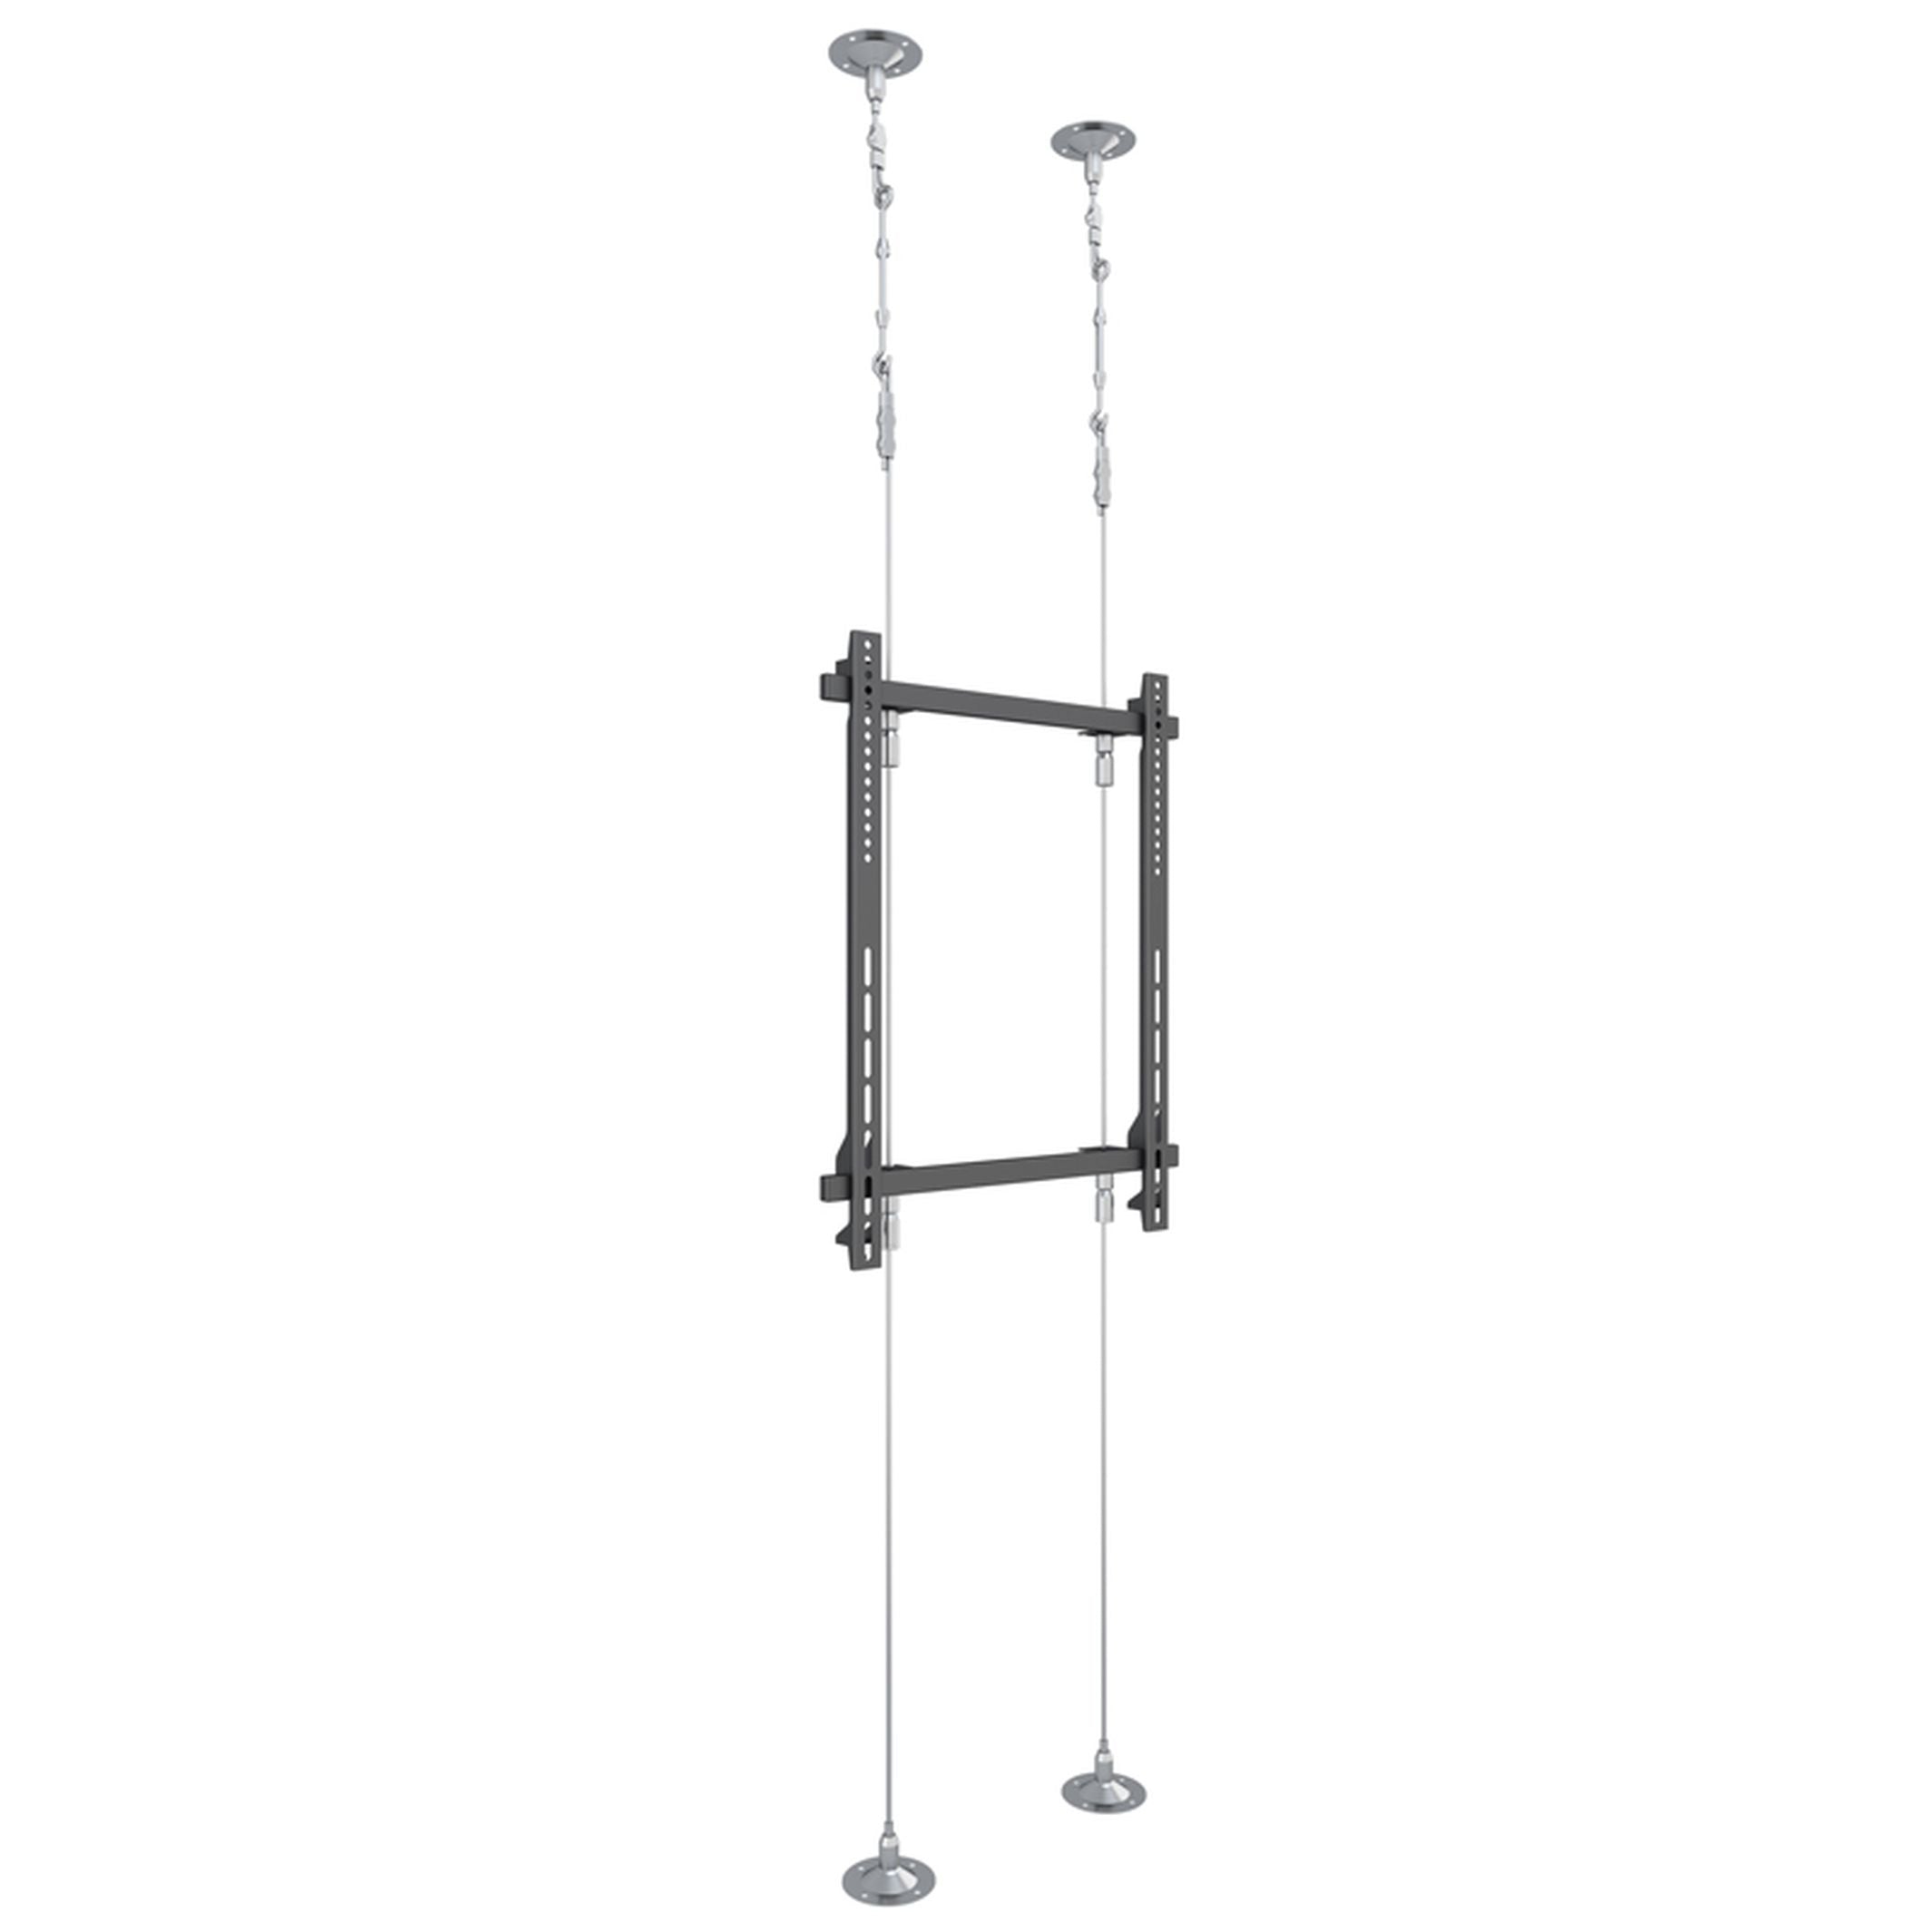 Single-Screen Wire-Supported Floor-to-Ceiling Mount (3000mm / 118.1" wire height)